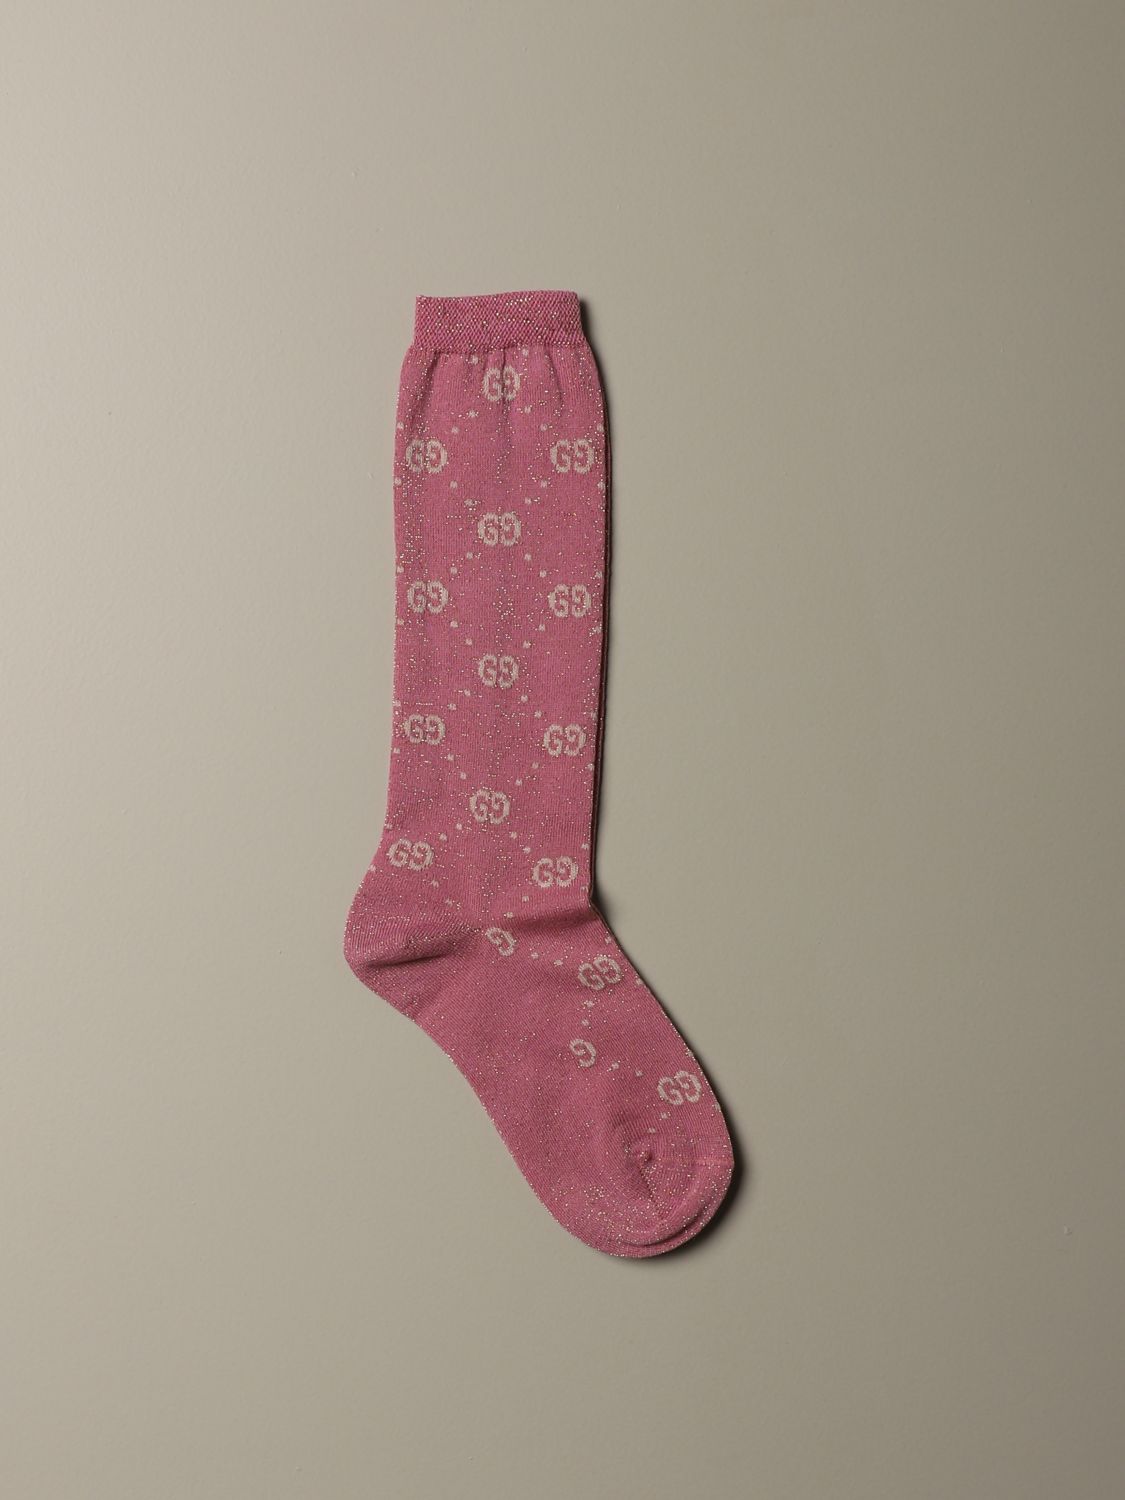 Top 98+ imagen pink gucci stockings - Abzlocal.mx